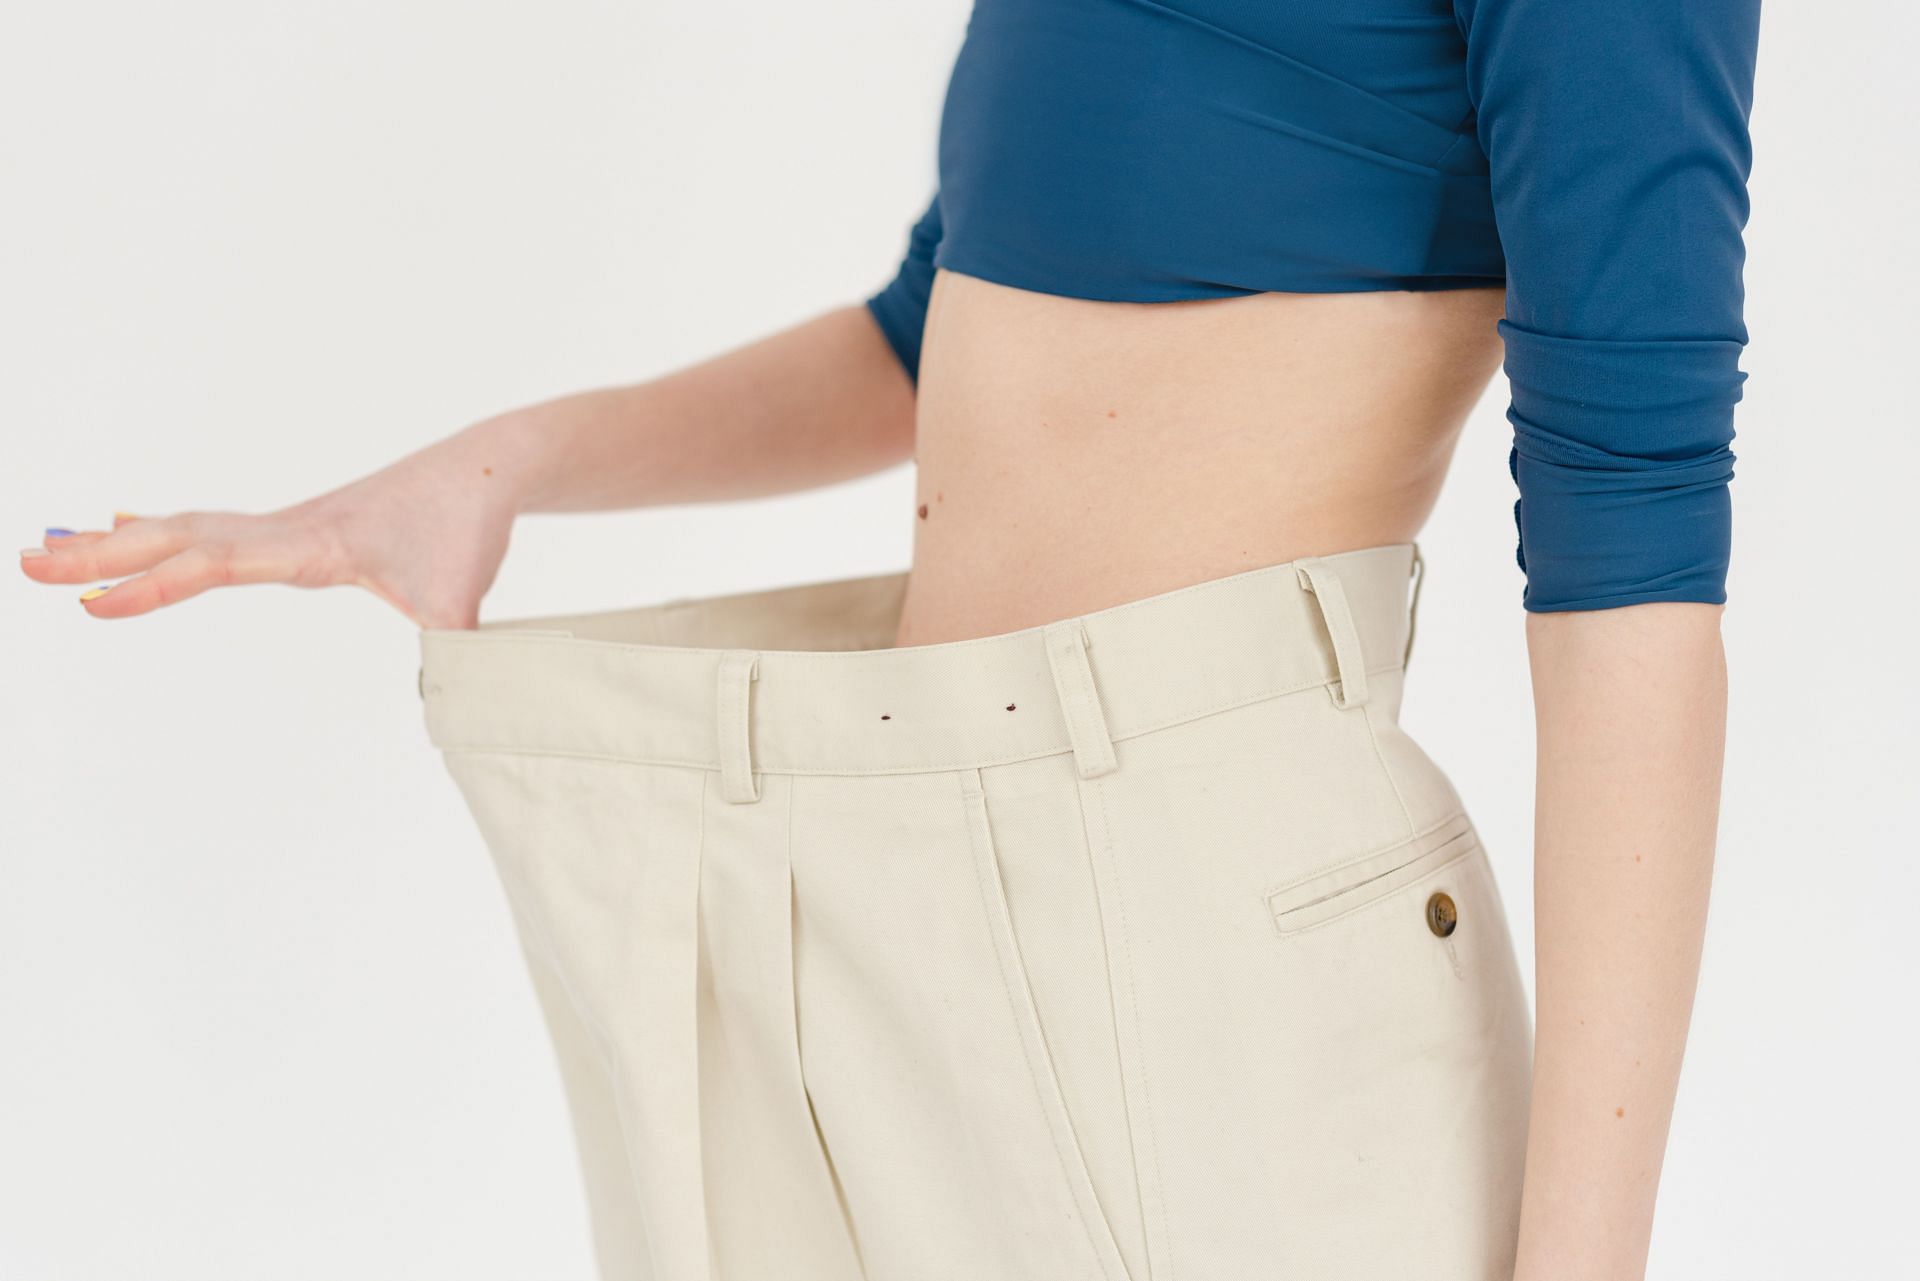 Do you think to use laxatives for weight loss? (Image via Pexels/ Shvets Production)